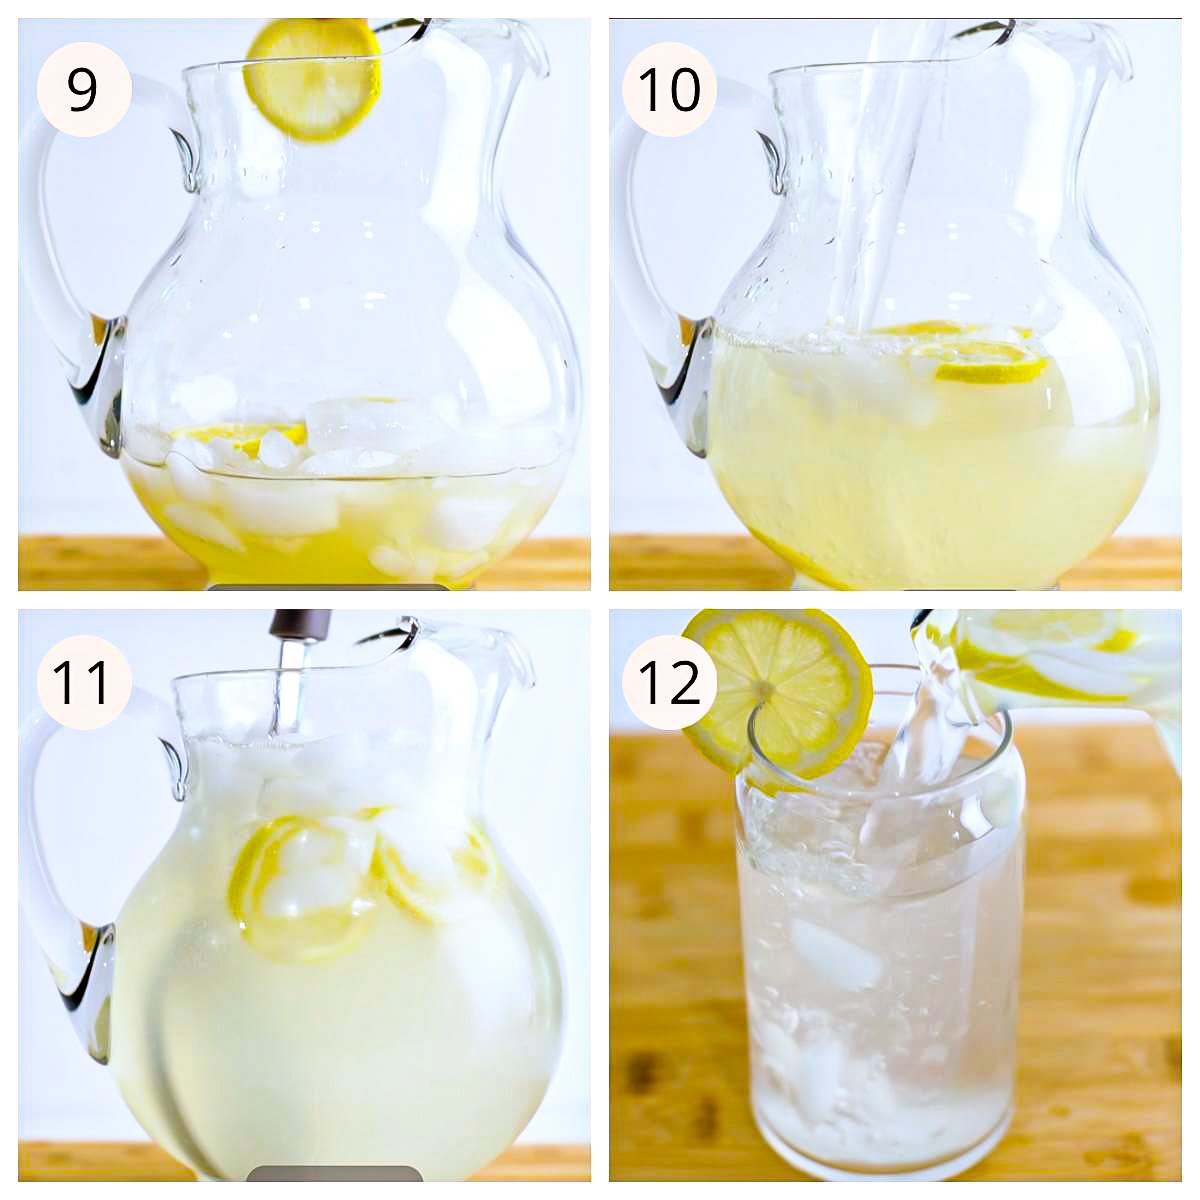 steps for making fresh squeezed lemonade in a pitcher